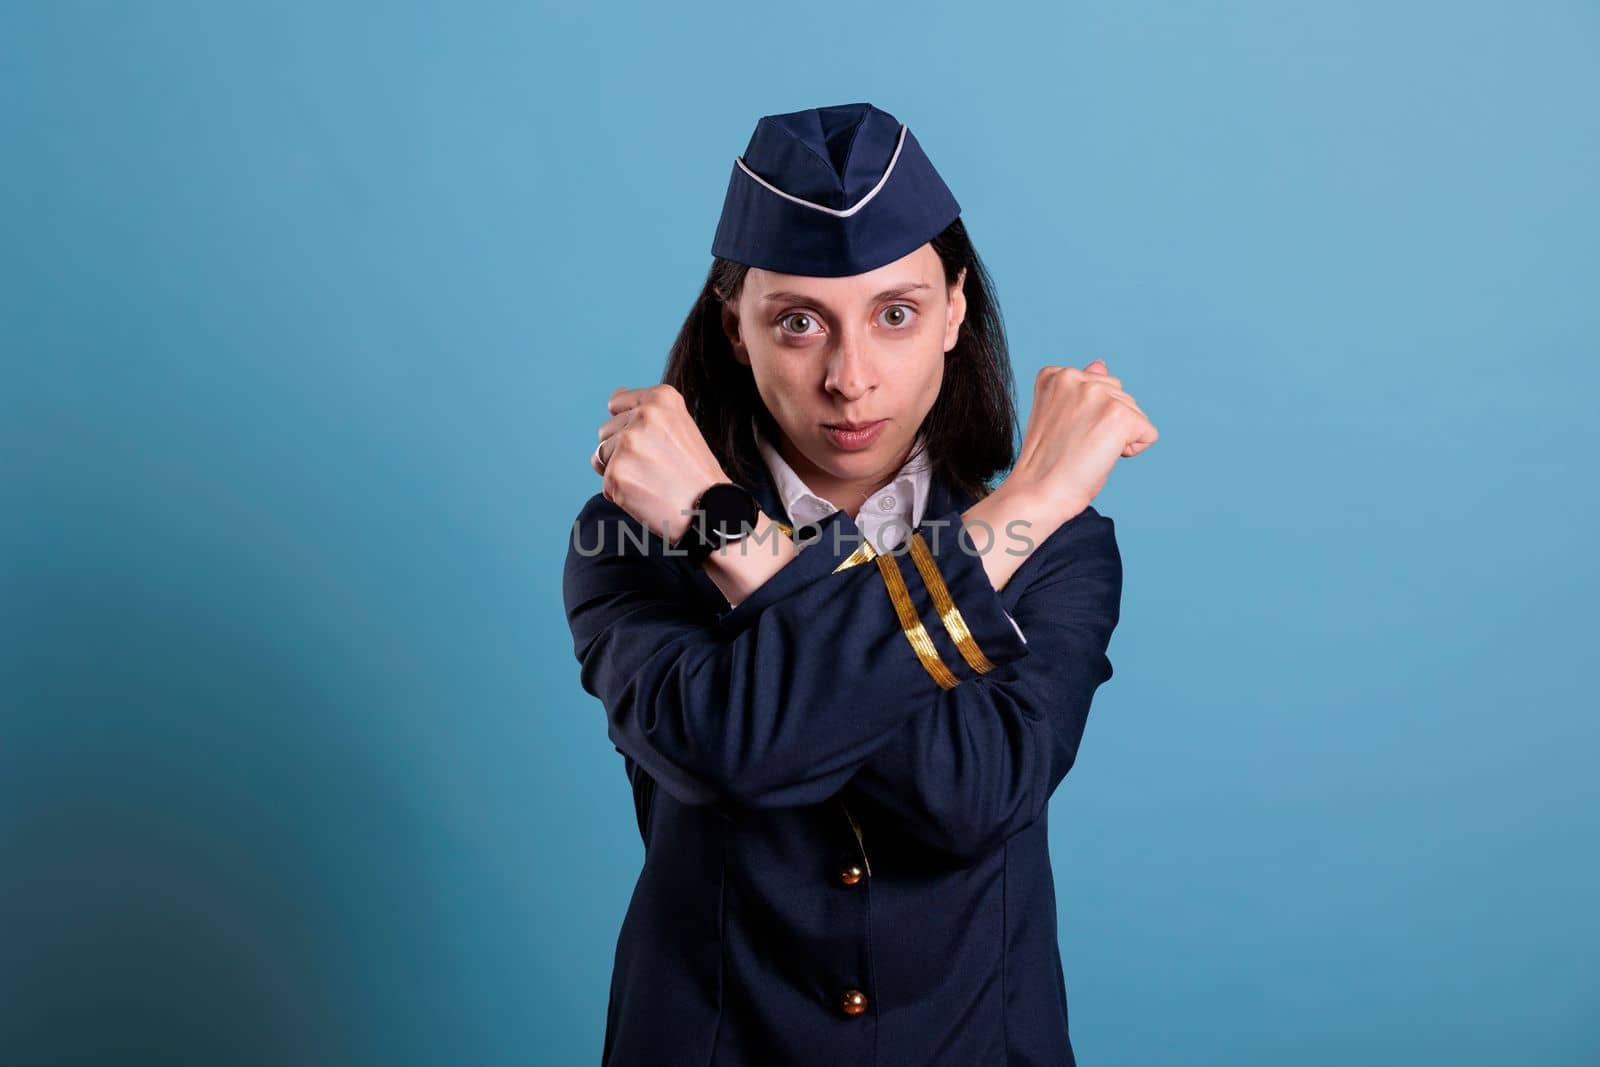 Flight attendant showing stop gesture with crossed arms, clenched fists. Stewardess in uniform looking at camera with serious facial expression, prohibition concept, defense symbol